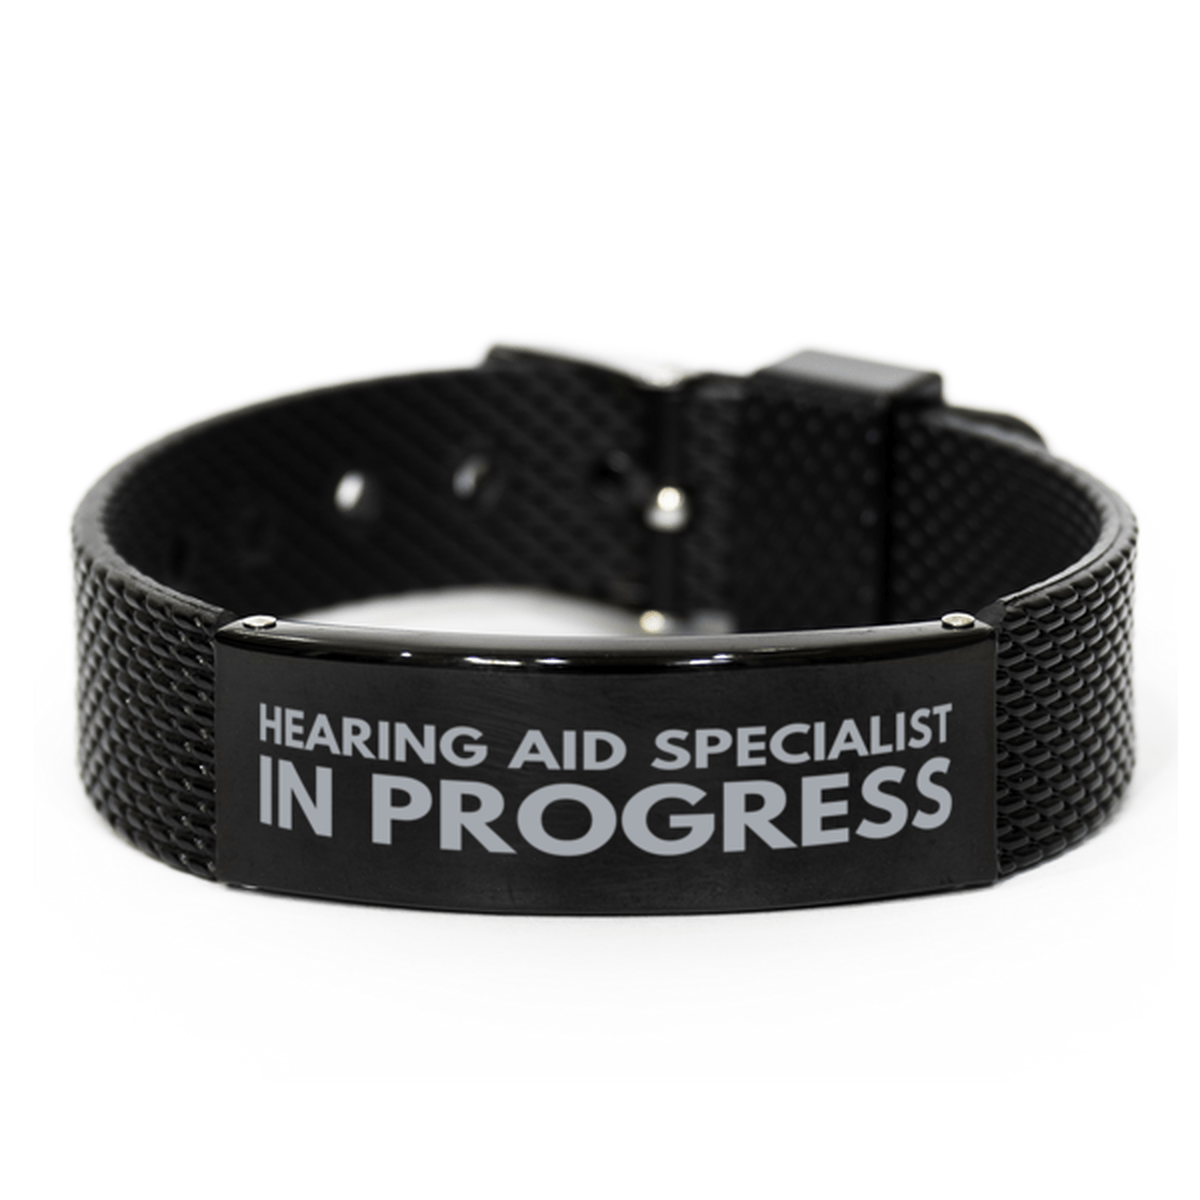 Inspirational Hearing Aid Specialist Black Shark Mesh Bracelet, Hearing Aid Specialist In Progress, Best Graduation Gifts for Students